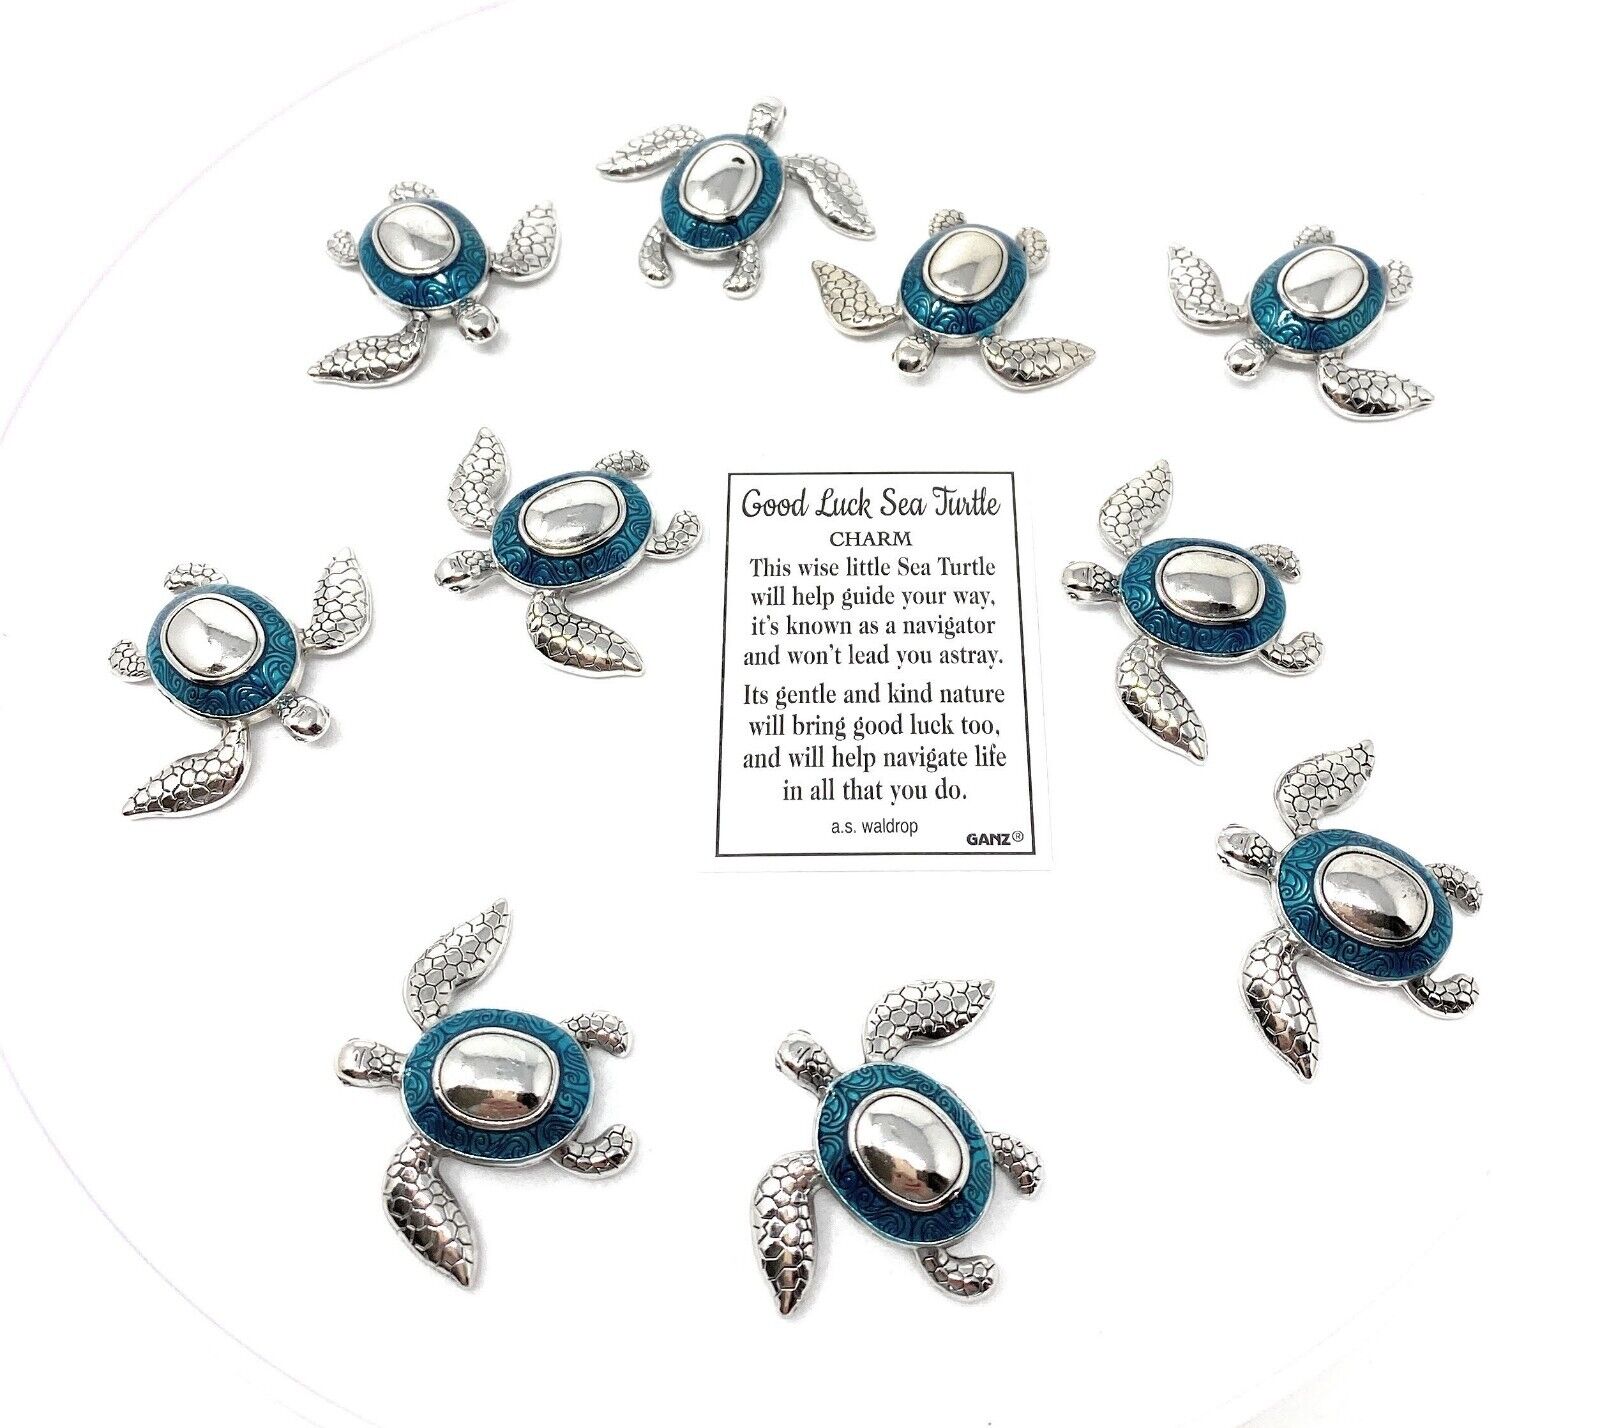 Set of 10 Good Luck Sea Turtles Pocket Charms with Story Card by Ganz